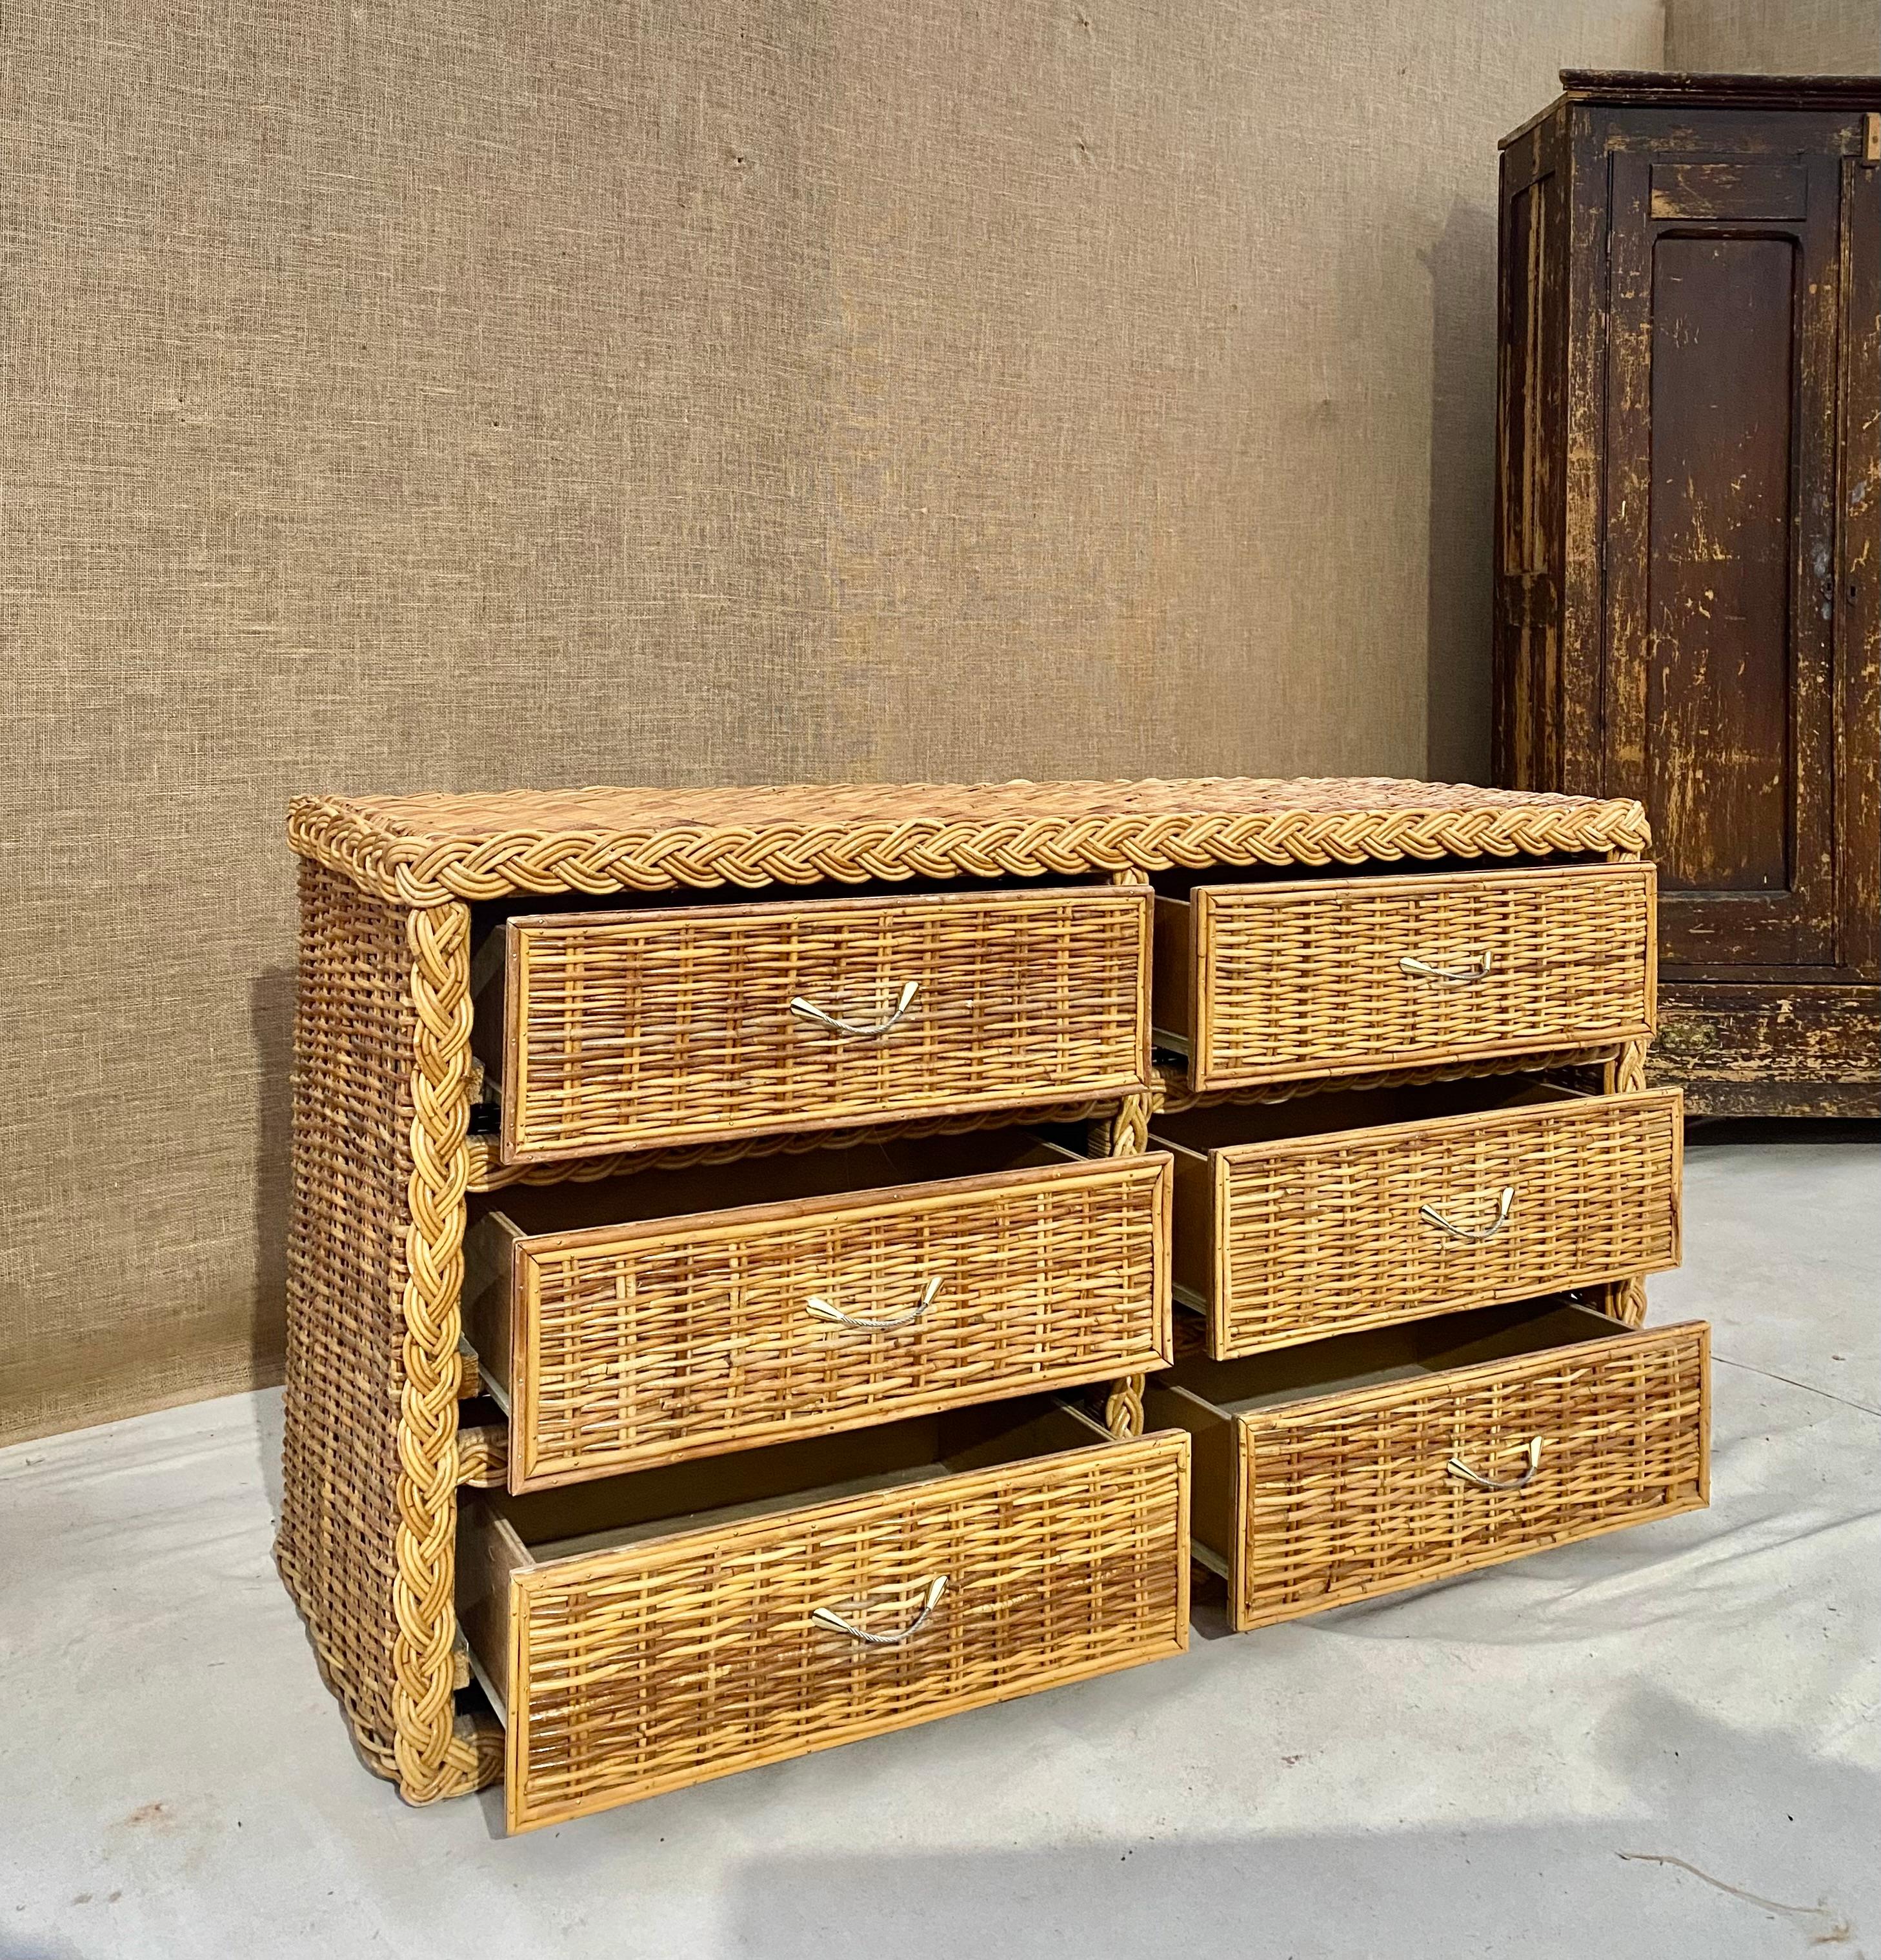 Woven Braided Rattan 6 Drawer Dresser (After Bielecky Brothers) For Sale